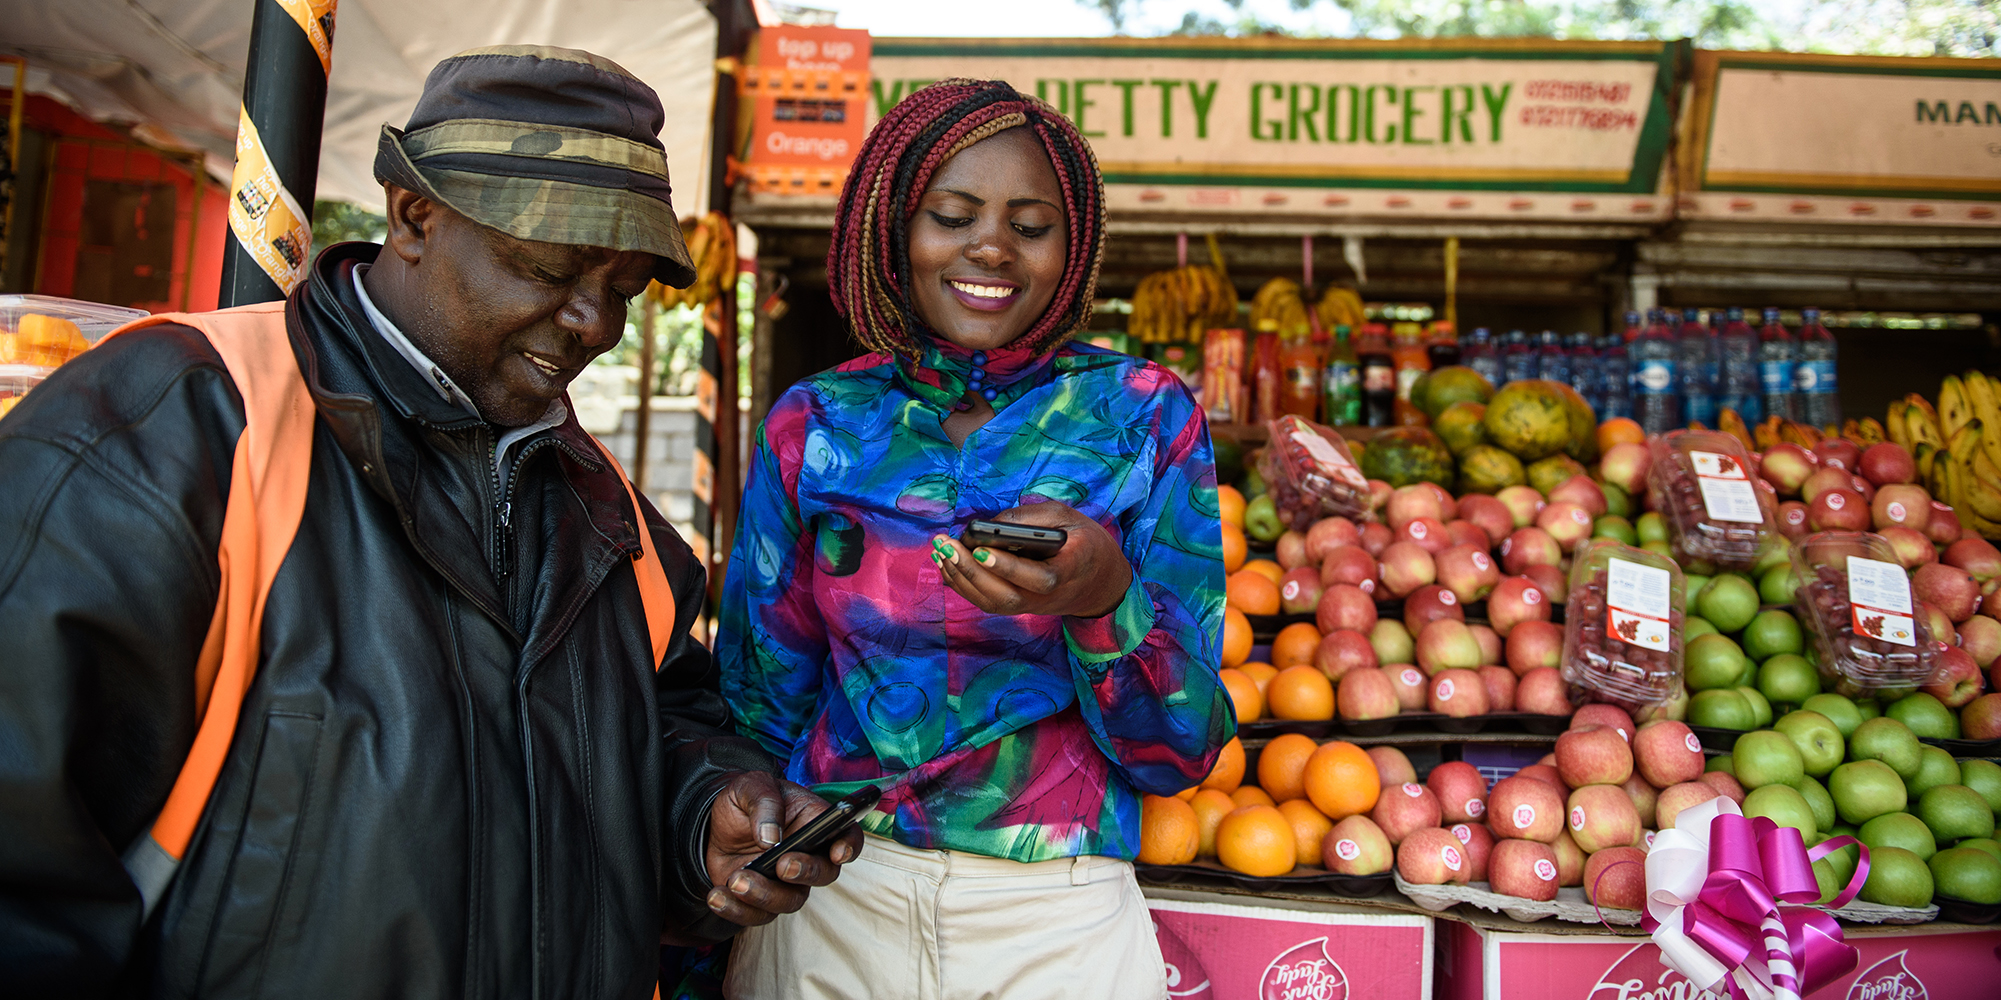 Smiling man looking at a cell phone a woman is holding in front of a fruit stand